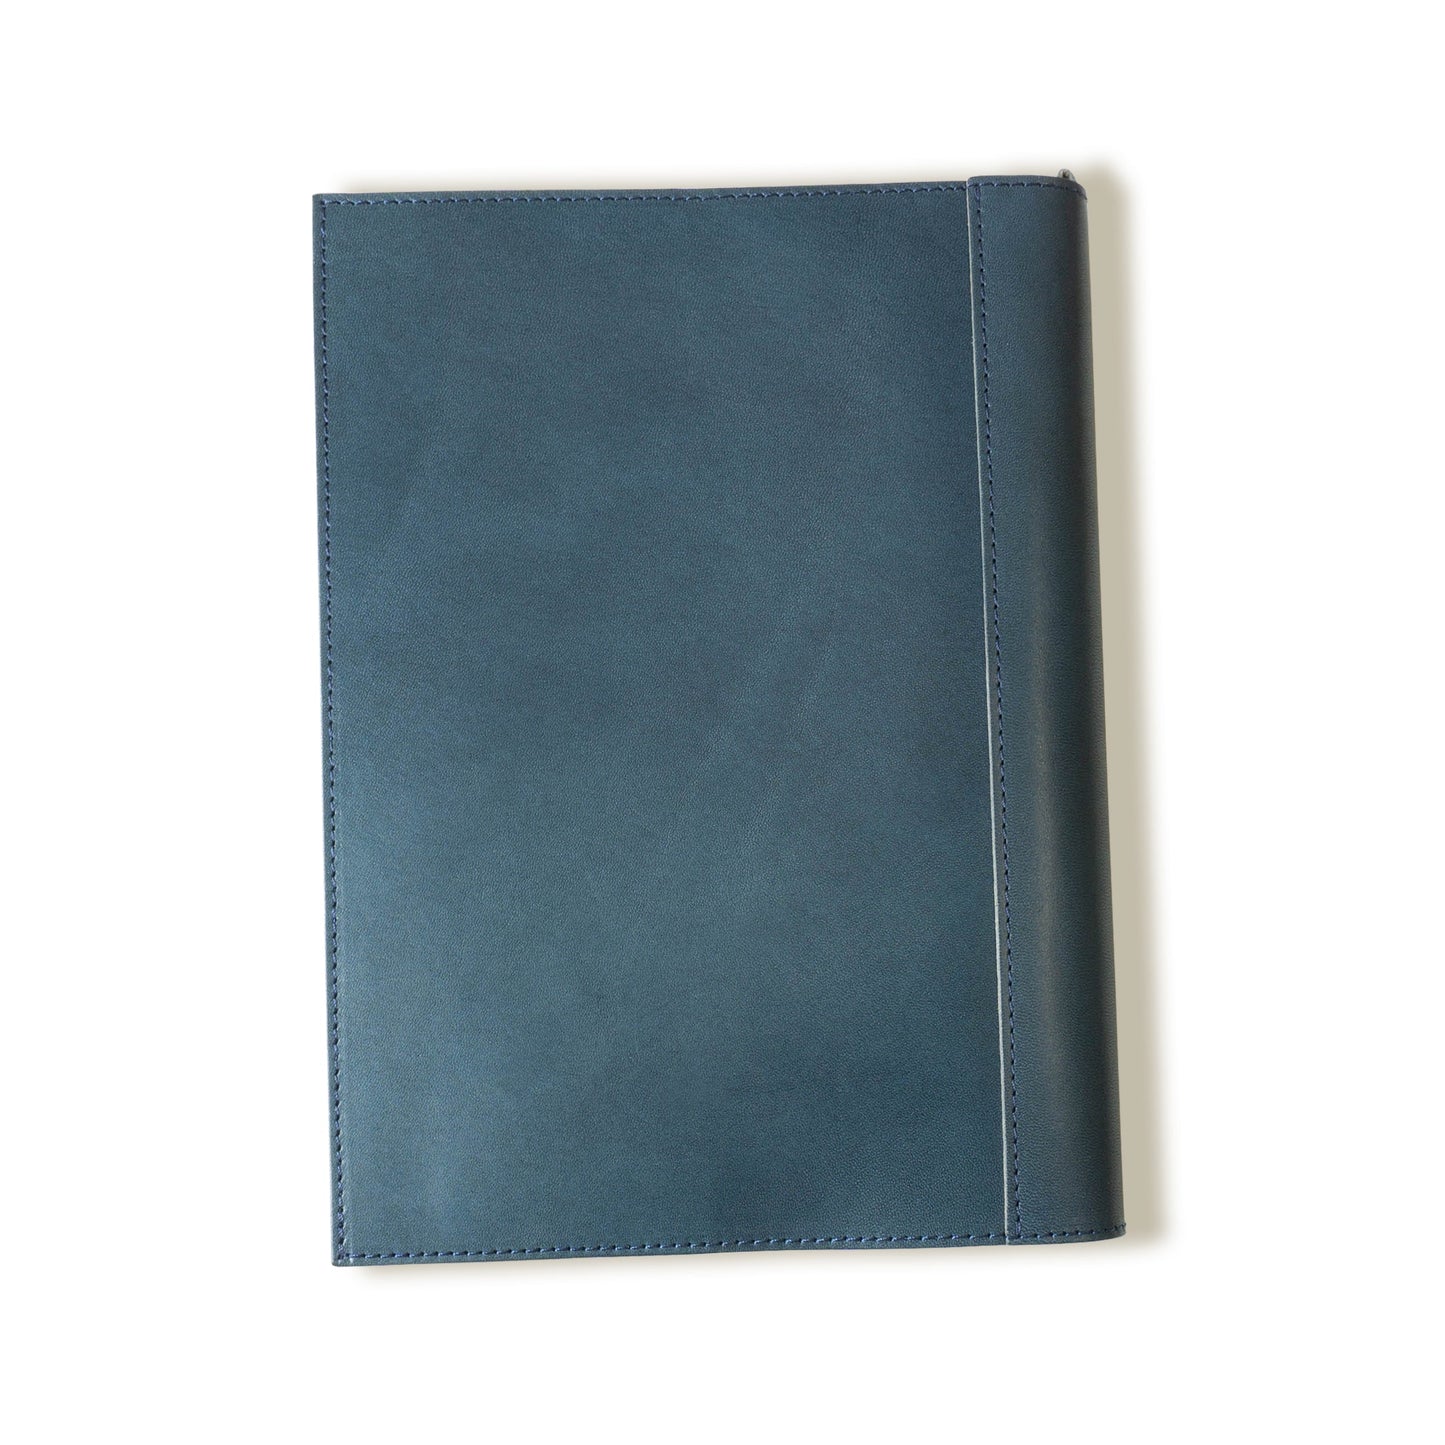 [Japanese Craftsman Made / Classic] Genuine leather Book Cover B5 bookmark included "Build-to-order manufacturing"